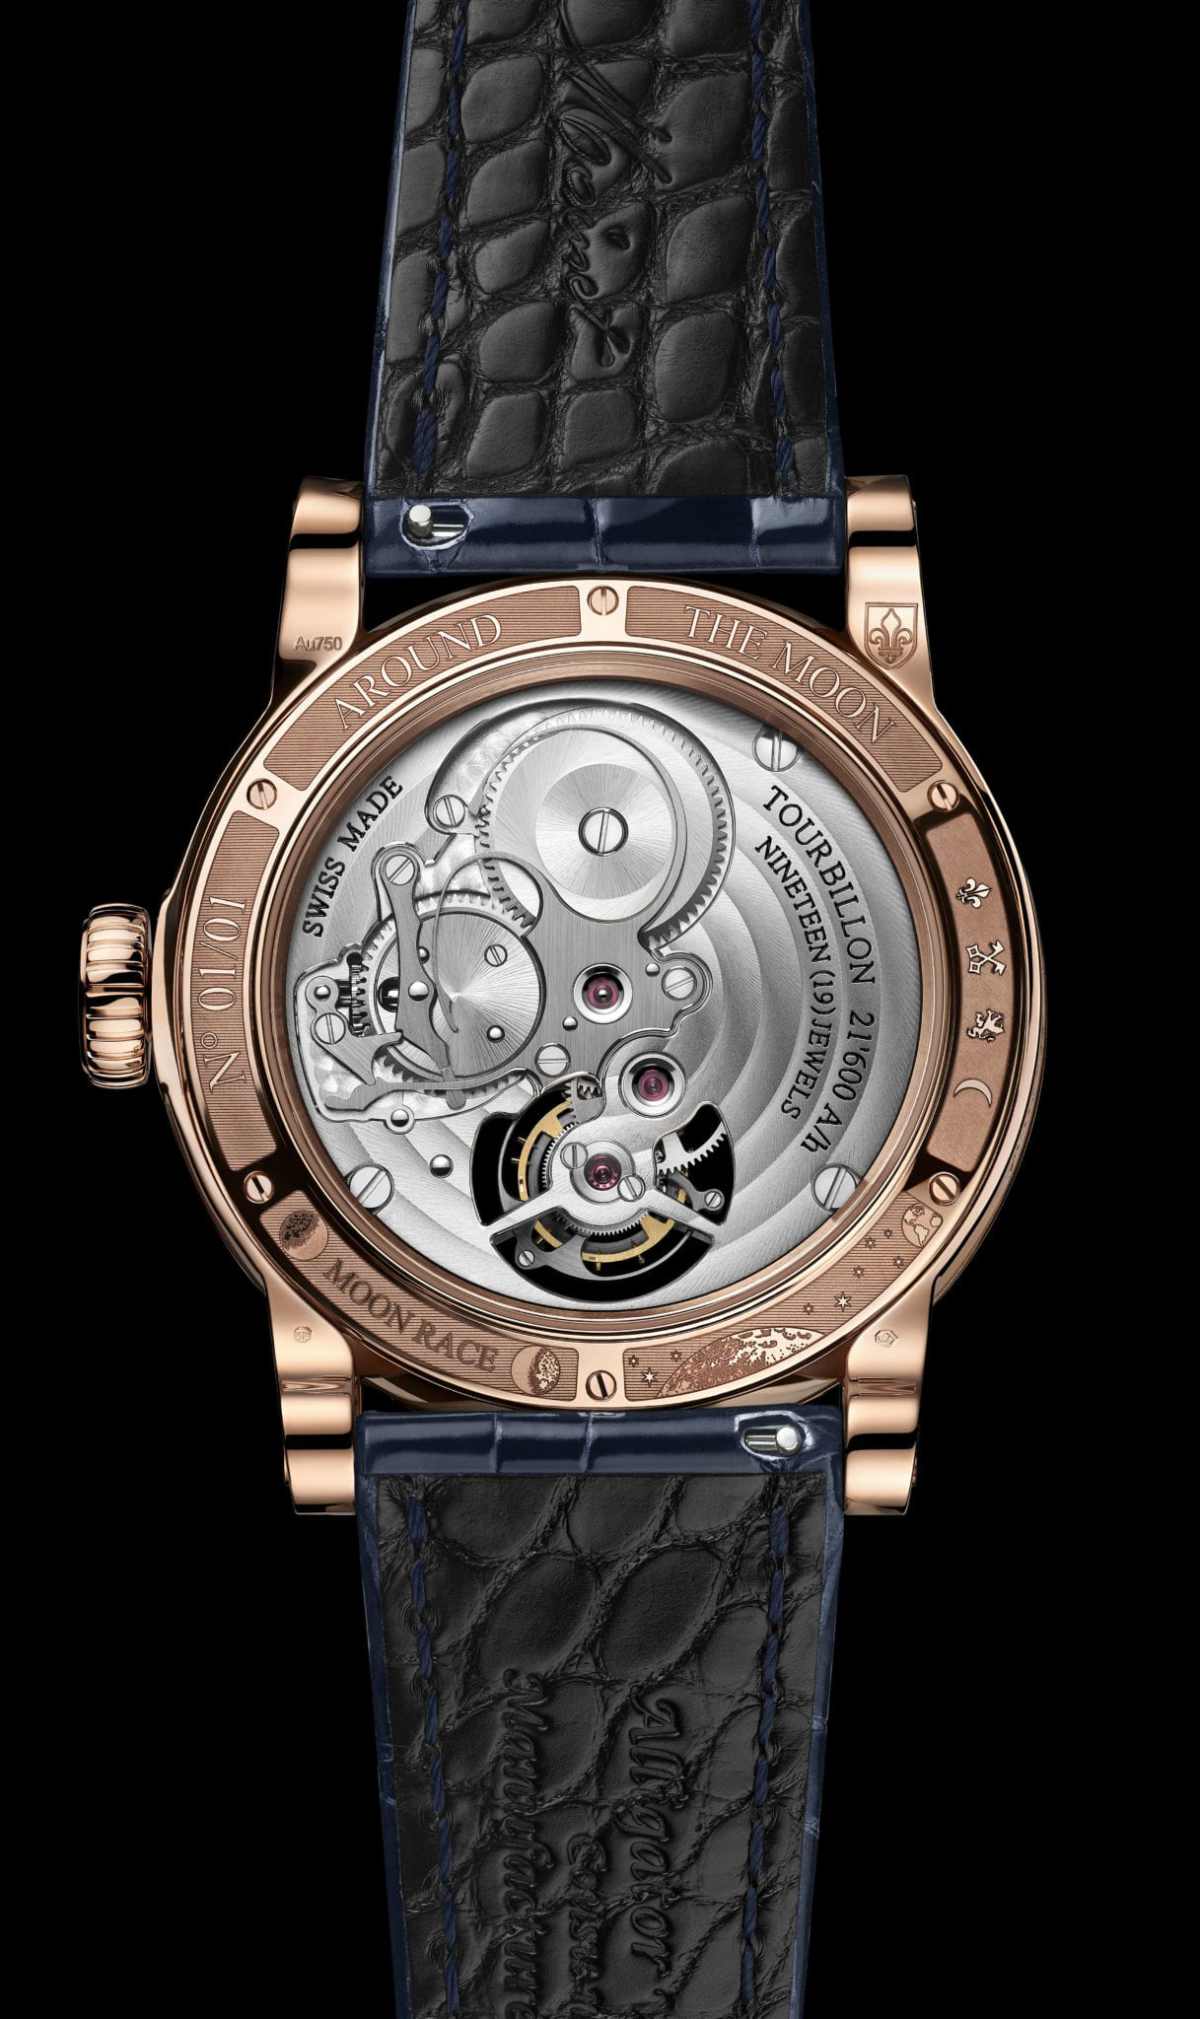 Louis Moinet's Presents Its Moon Race Watch Collection, A Journey Through The Space